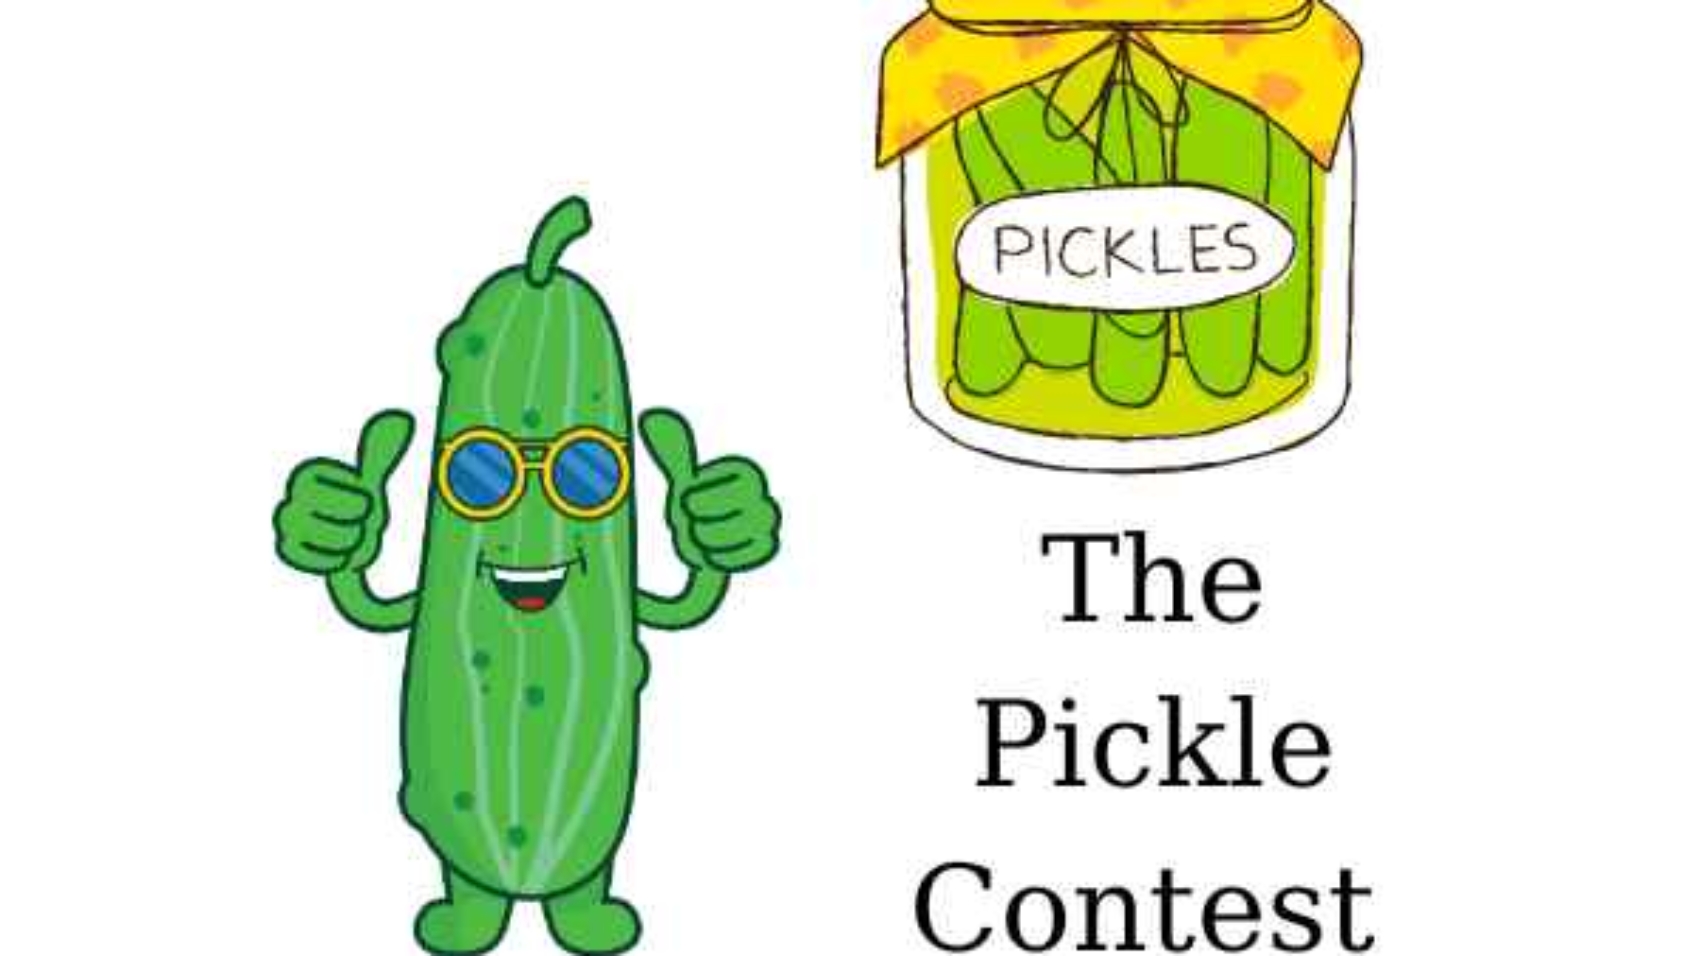 A pickle guy pointing at himself with a jar of pickles